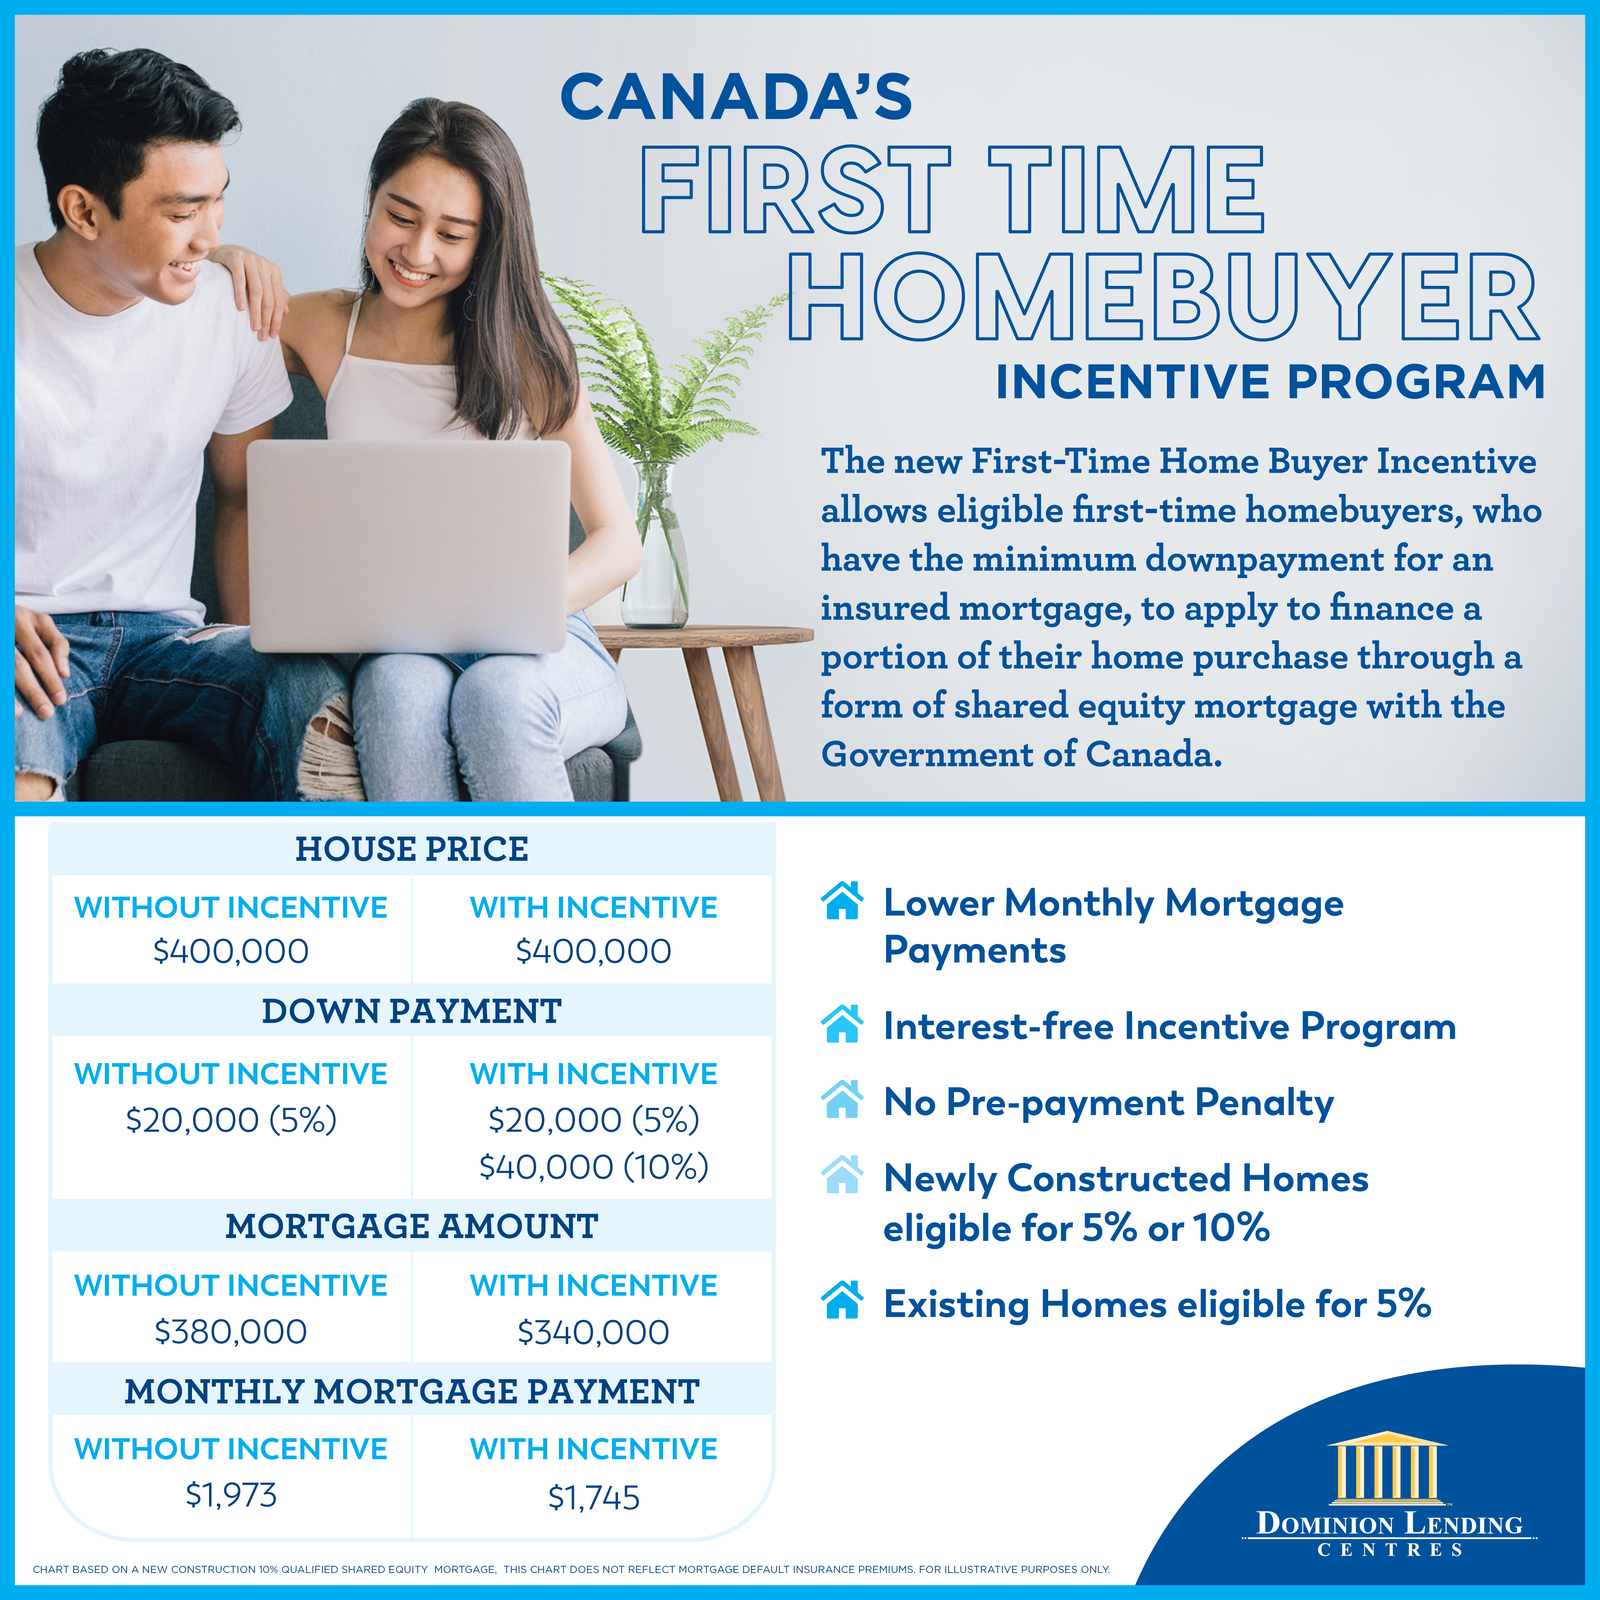 First-Time Home Buyer Incentive Program